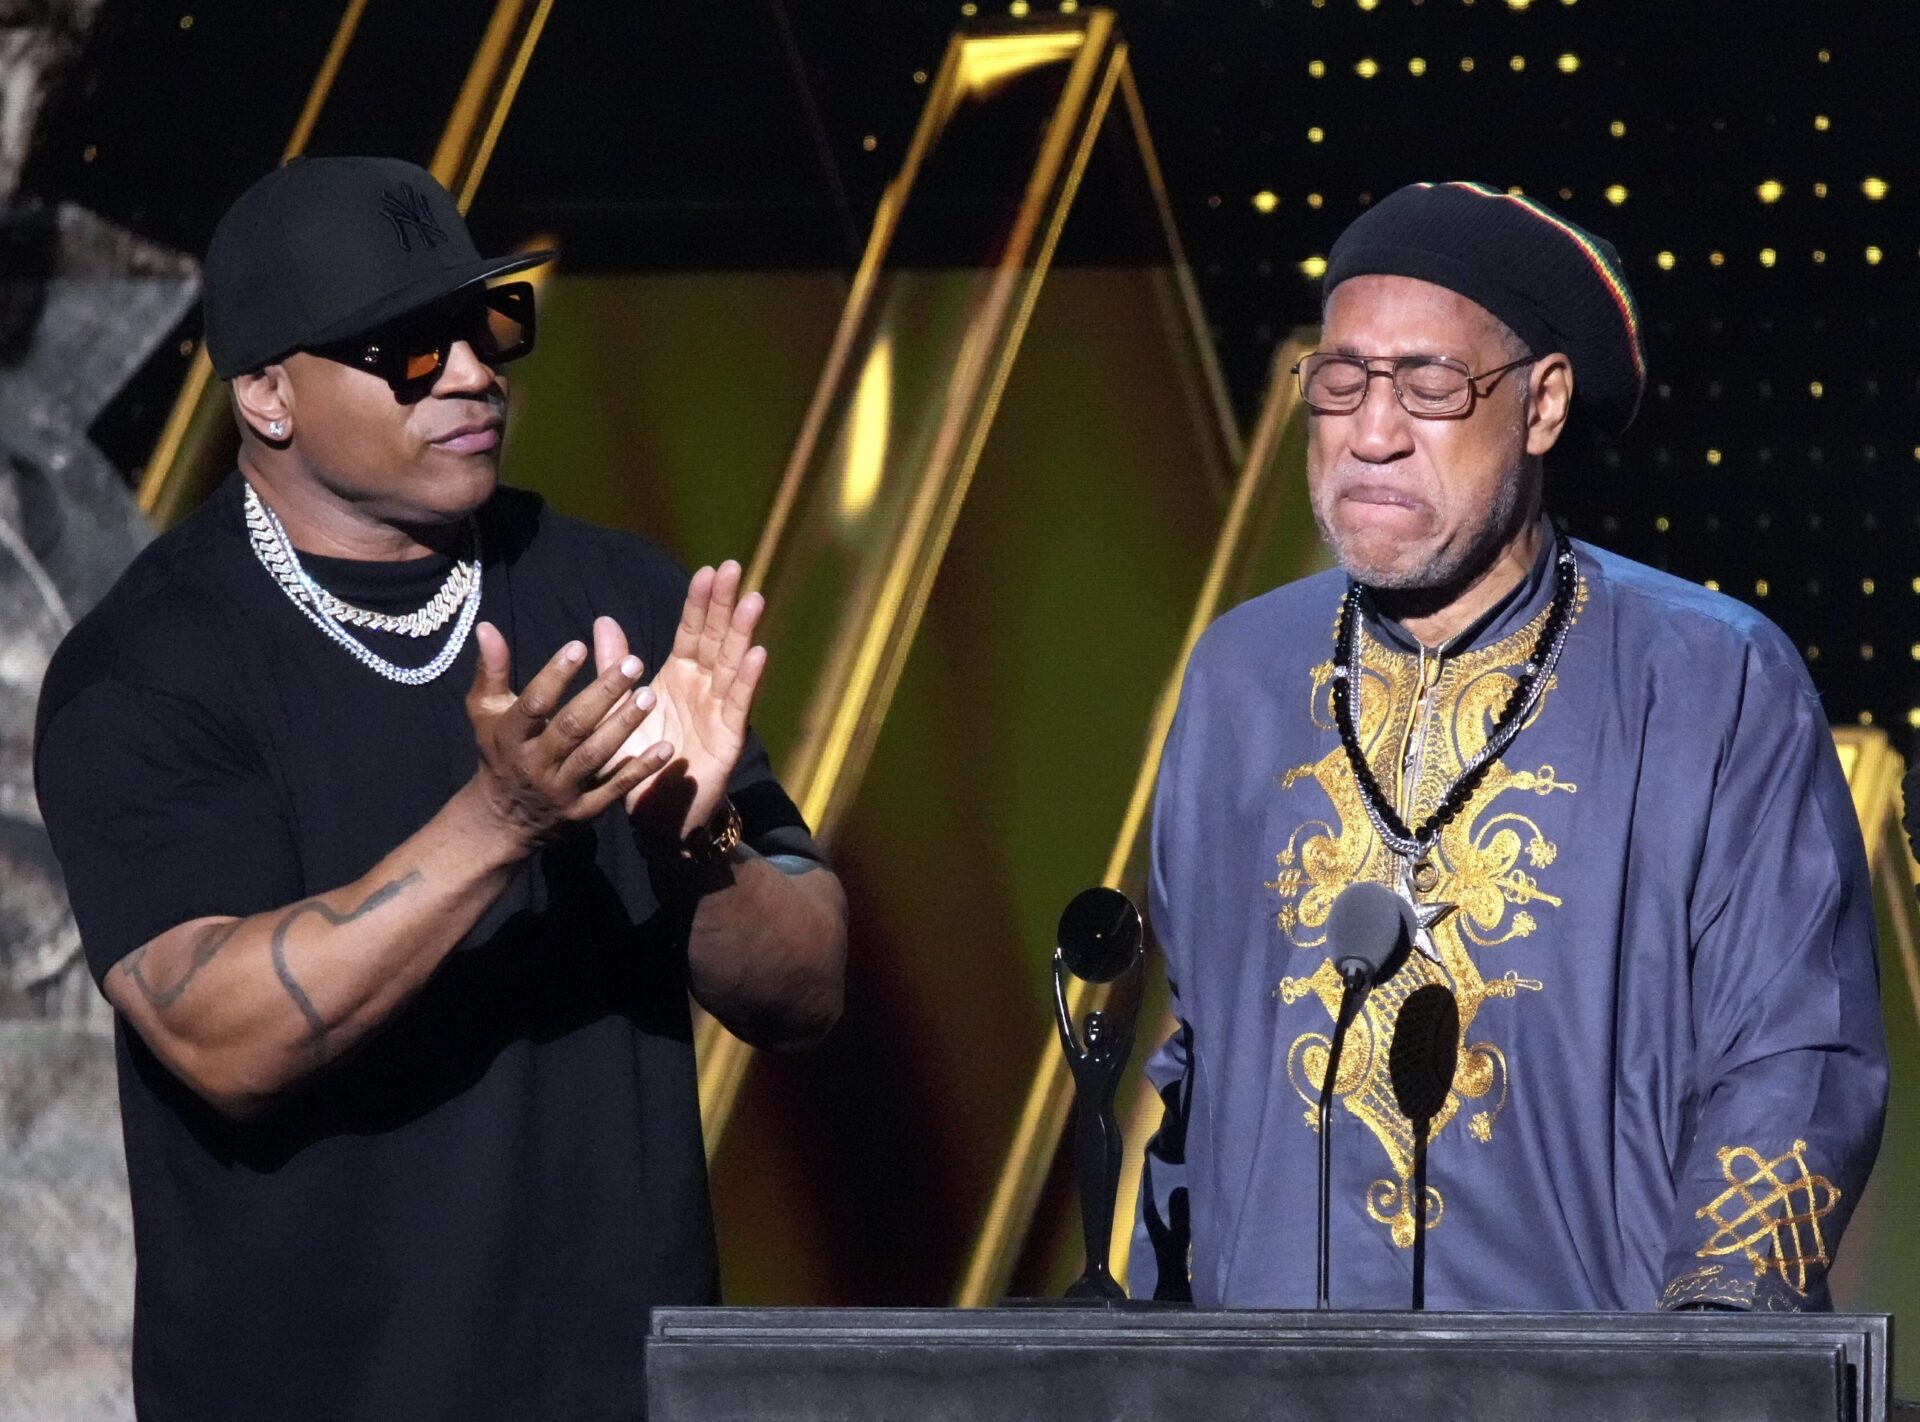 DJ Kool Herc Overcome With Emotion As LL Cool J Inducts Him Into The Rock & Roll Hall Of Fame